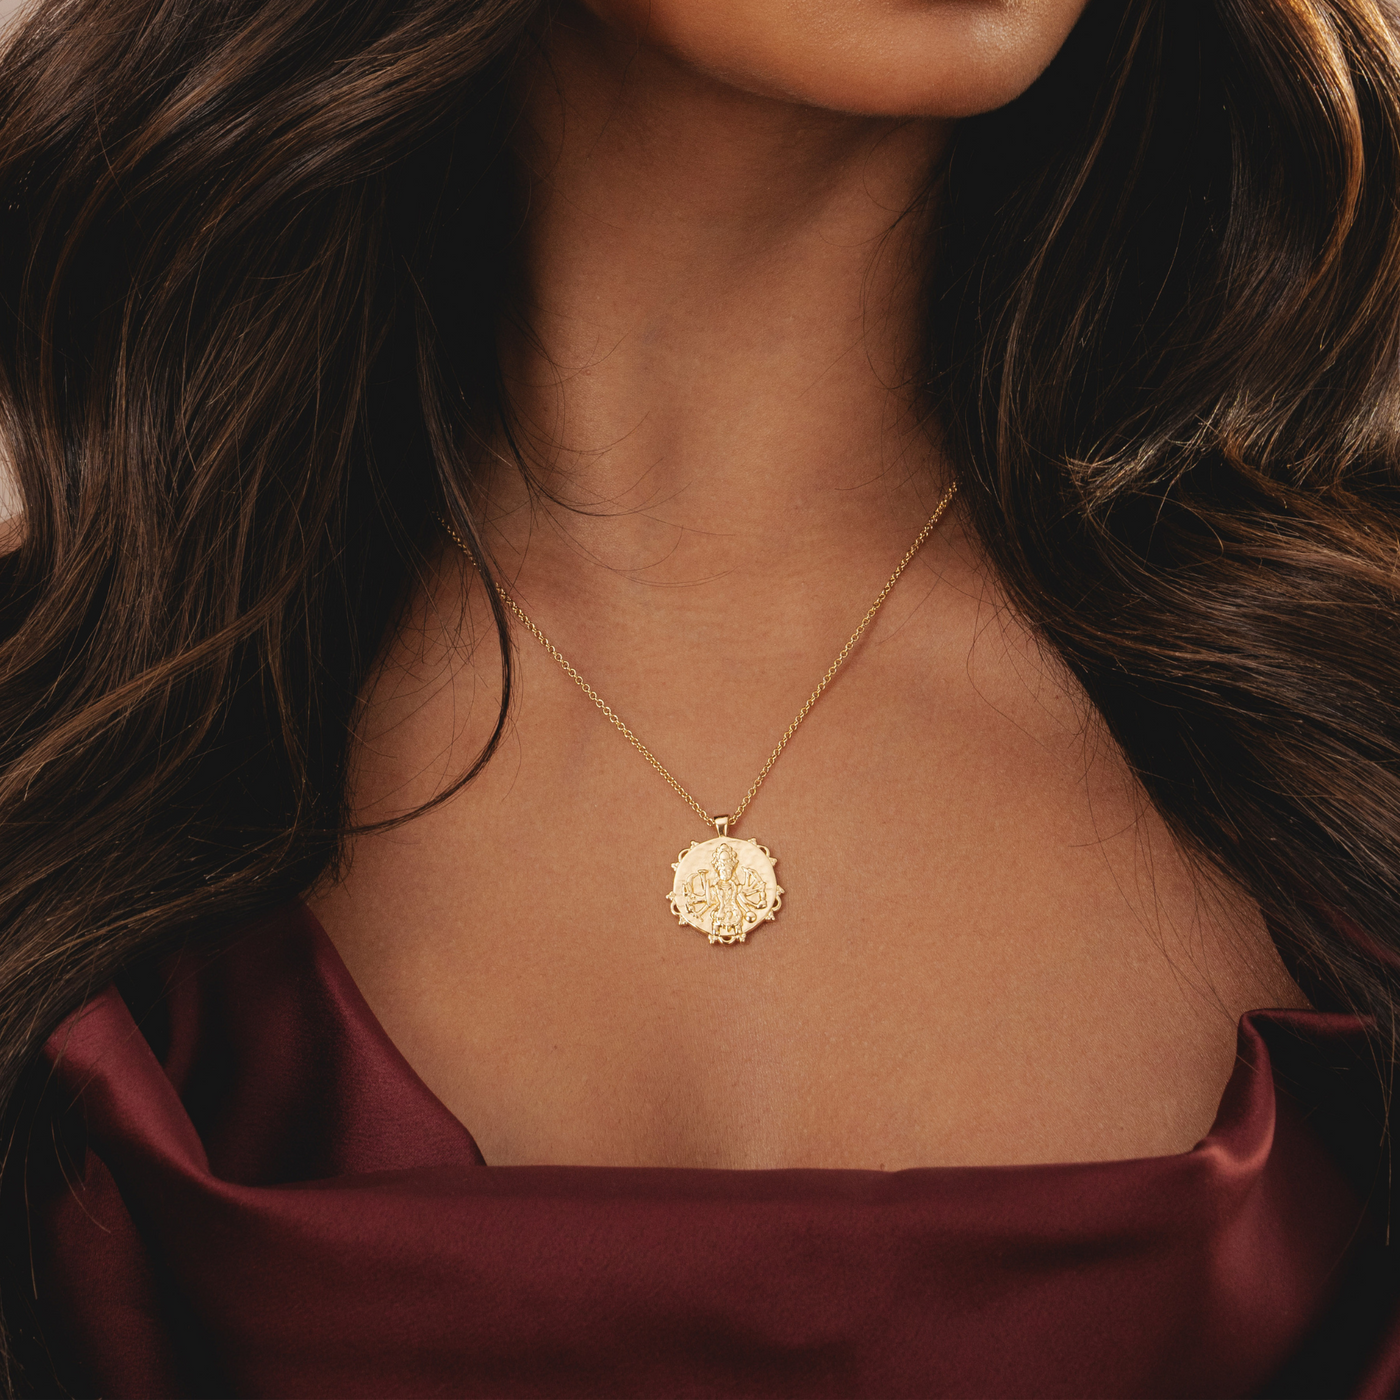 Adorn with purpose: Rani & Co.'s sustainable Kali Goddess necklace, a hammered gold masterpiece for empowered women